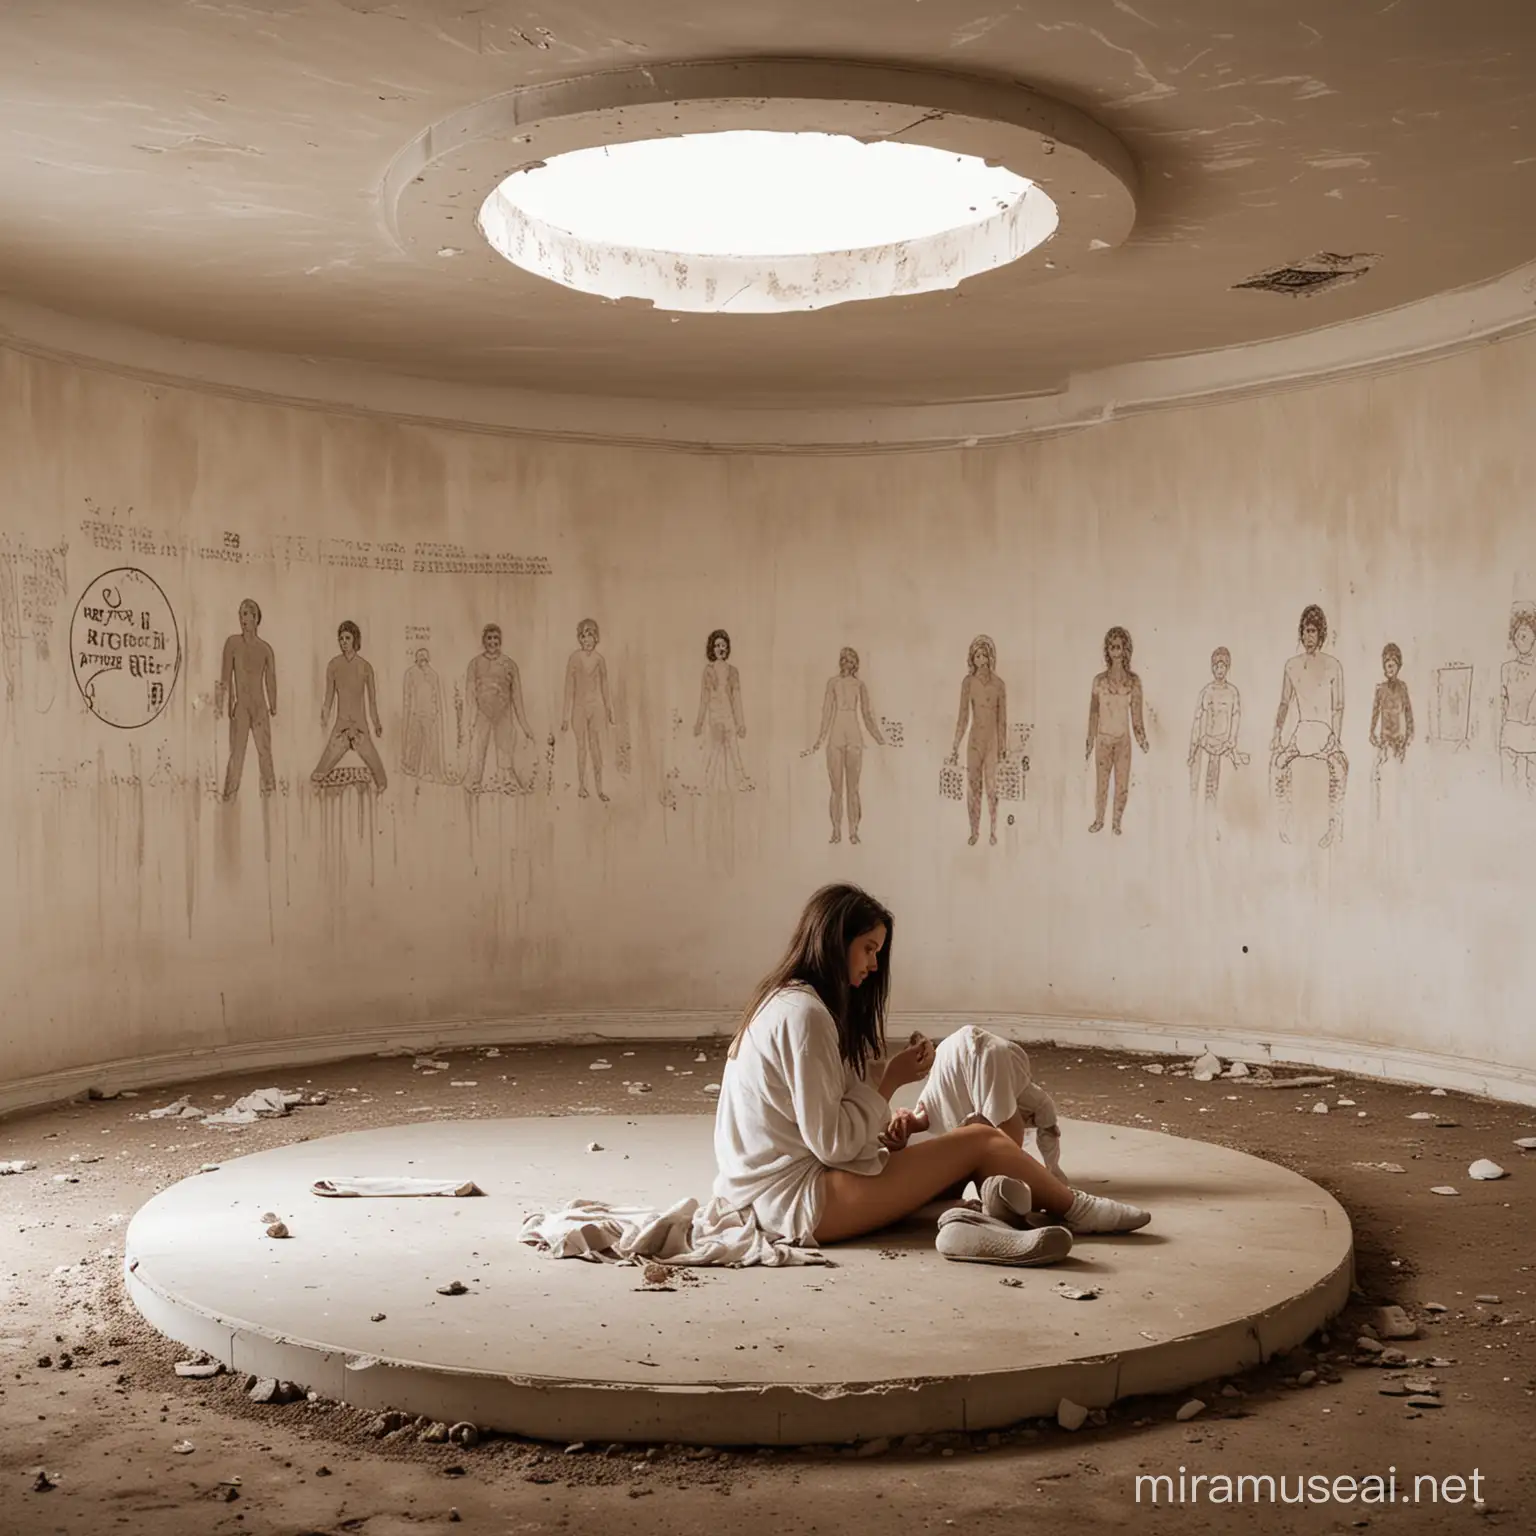 Circular Room with Dirty Walls Hermaphrodite Couple Observing Girl in White Dress